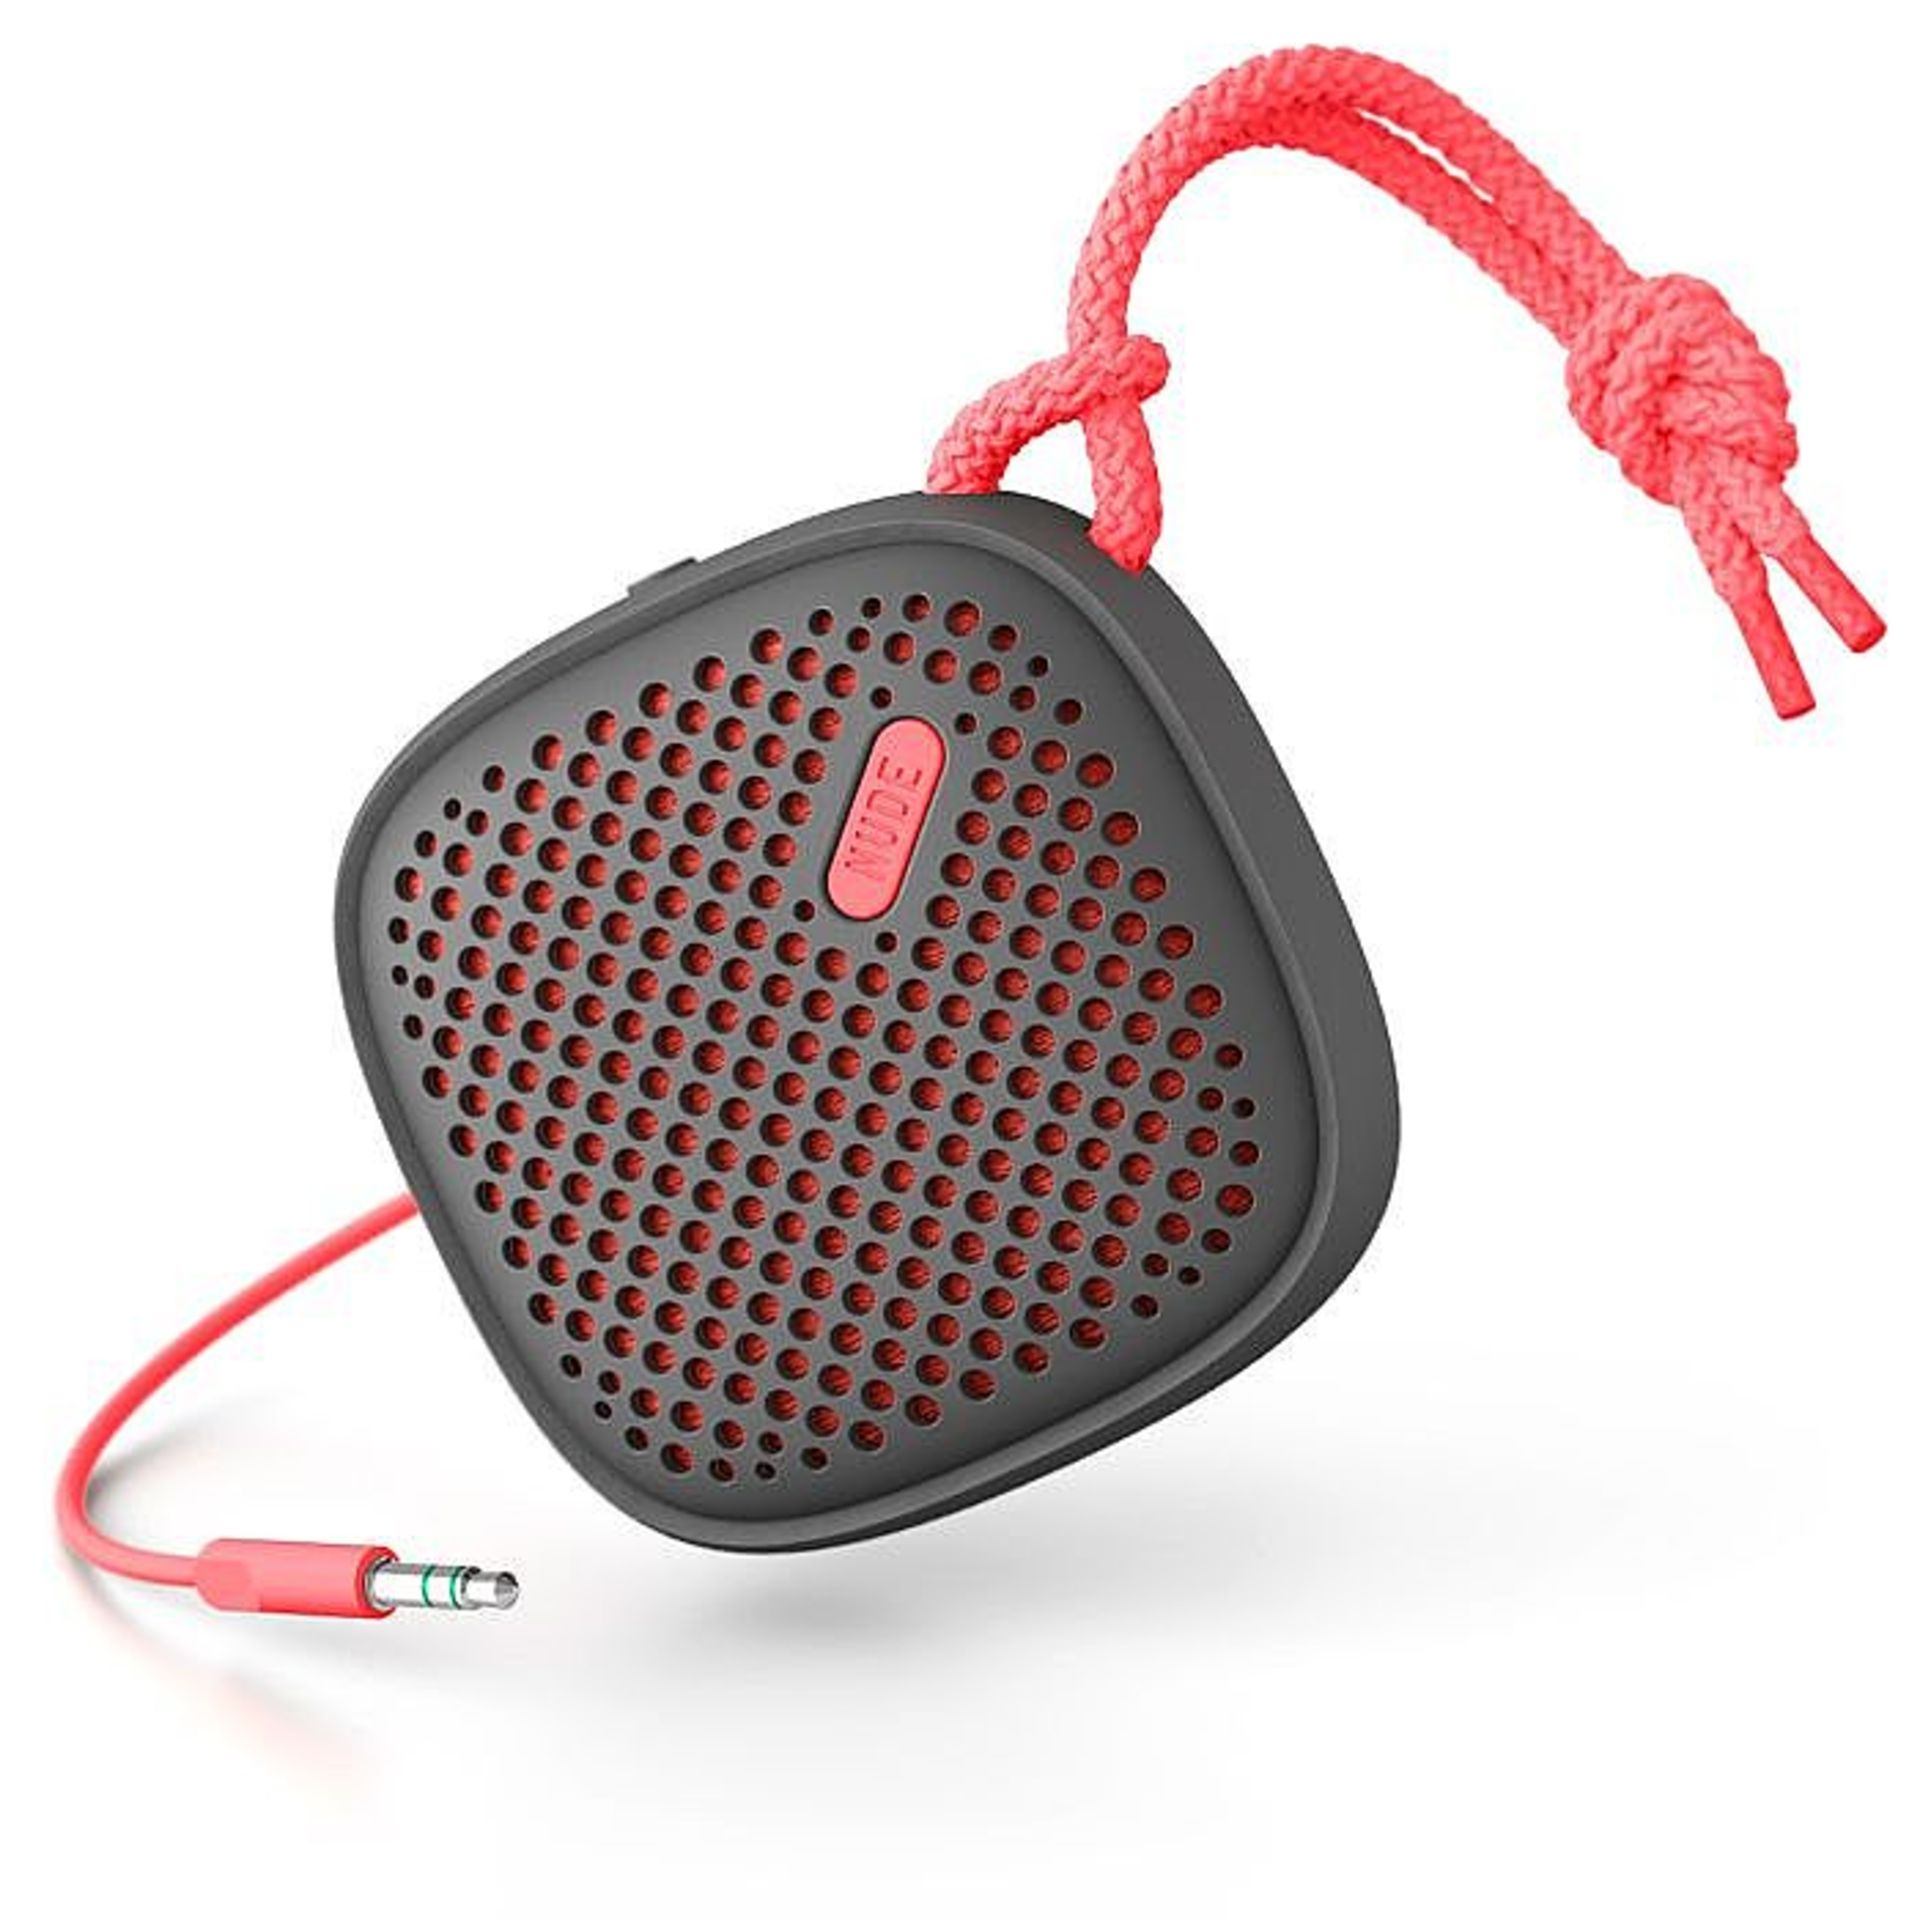 V *TRADE QTY* Brand New Nude Audio Move S Wired Portable Speaker - Coral X 5 YOUR BID PRICE TO BE